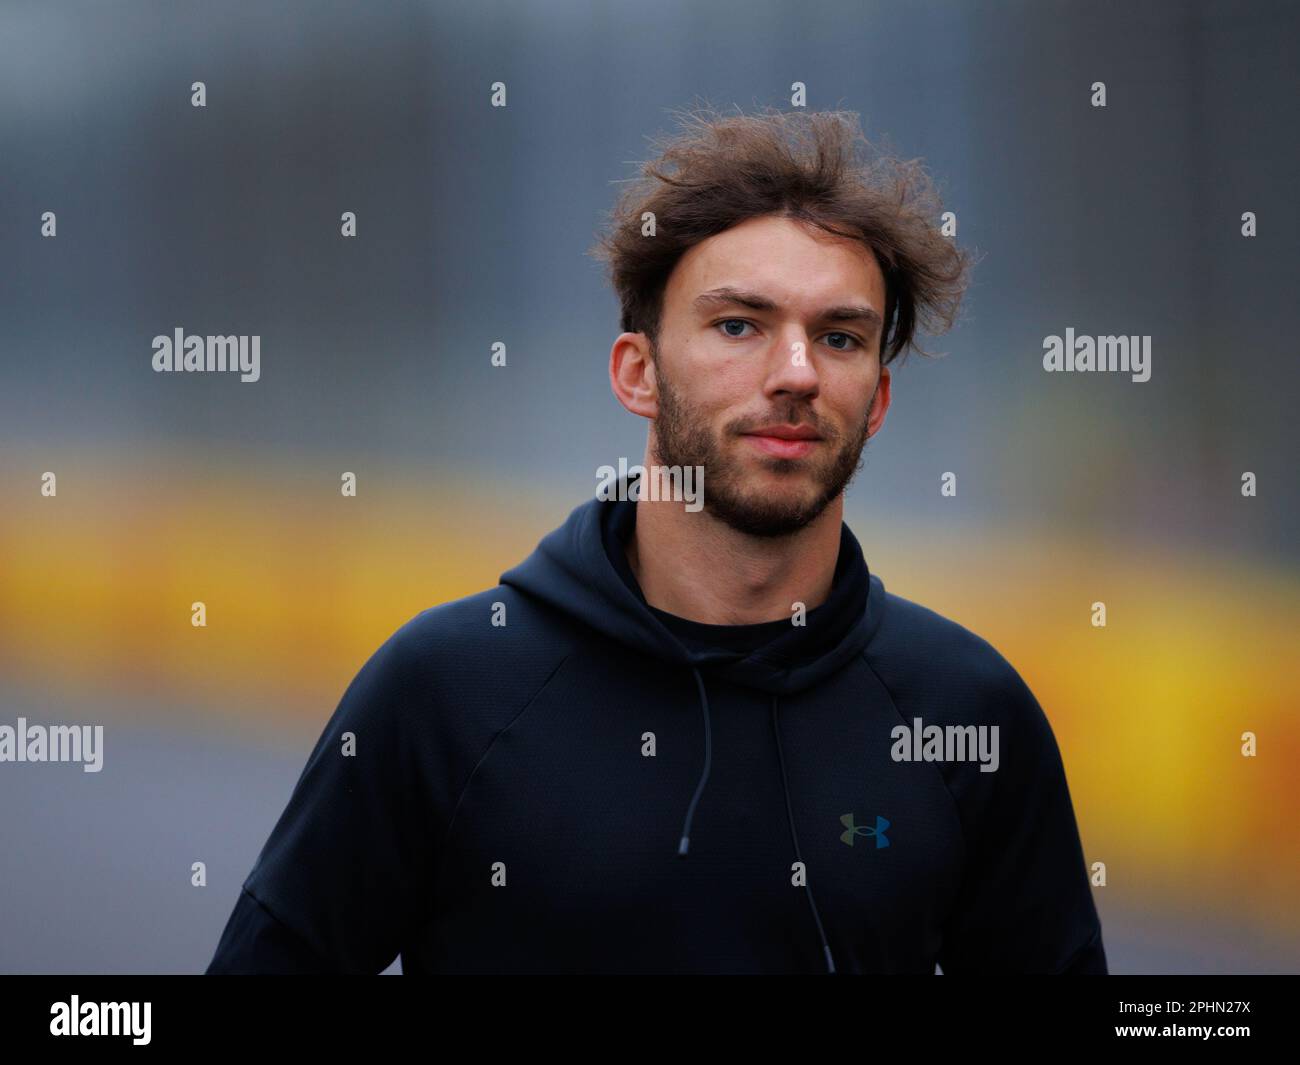 Albert Park, 29 March 2023 Pierre Gasly (FRA) of team Alpine together with his team jogs on the Albert Park street circuit ahead of the 2023 Australian Formula 1 Grand Prix corleve/Alamy Live News Stock Photo